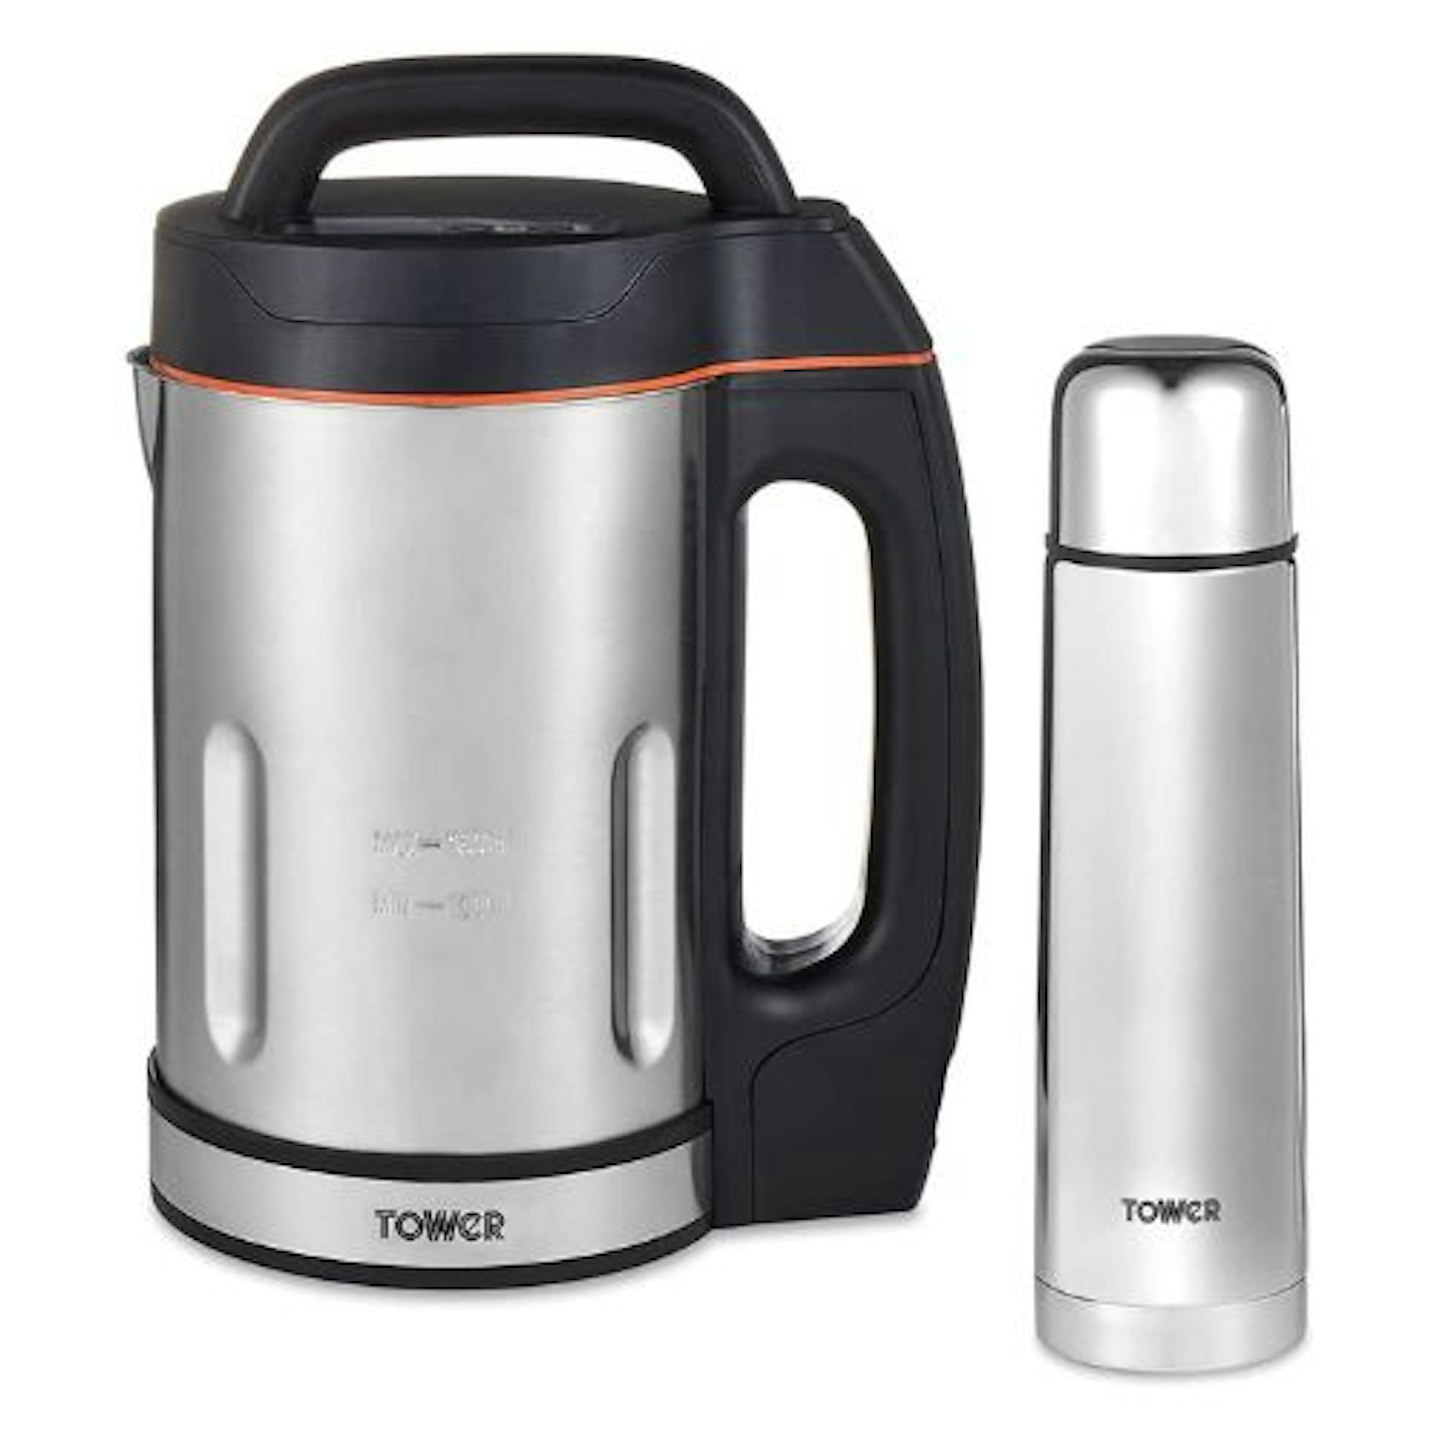 Tower, T12031 Soup & Smoothie Maker